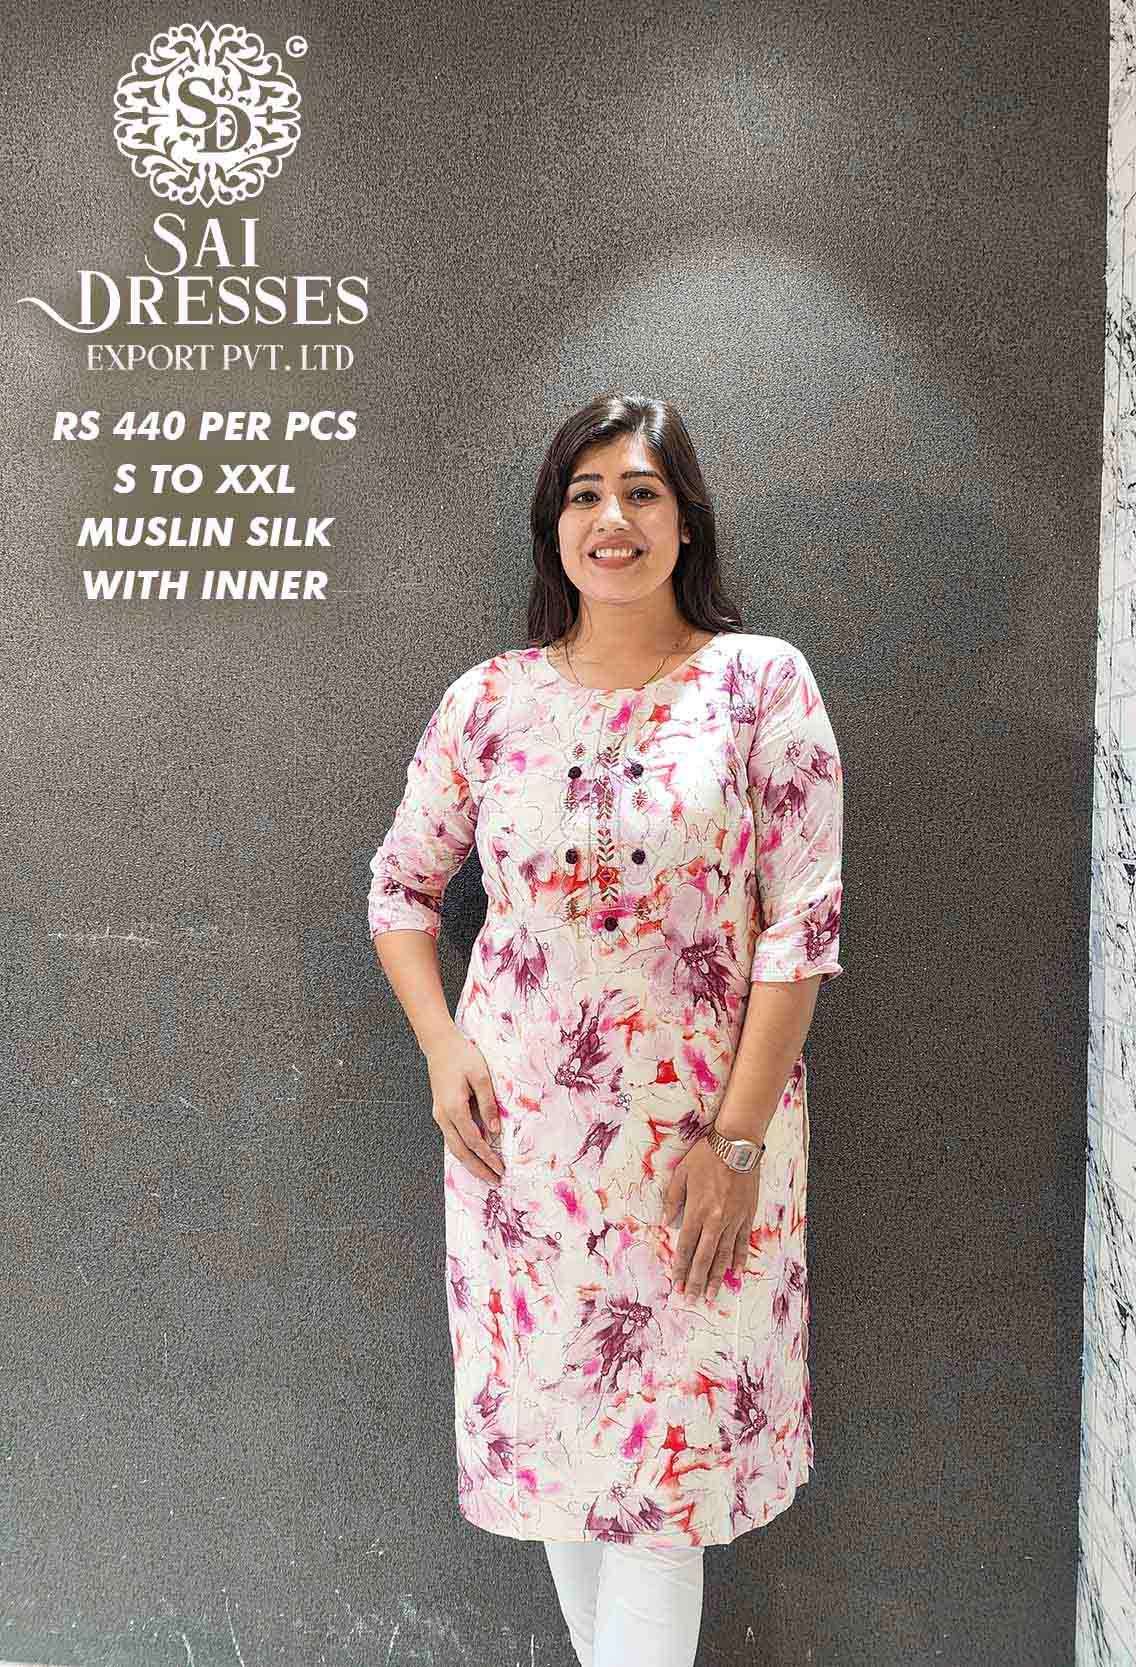 SAI DRESSES PRESENT D.NO SD41 READY TO WEAR DIGITAL PRINTED KURTI COMBO COLLECTION IN WHOLESALE RATE IN SURAT